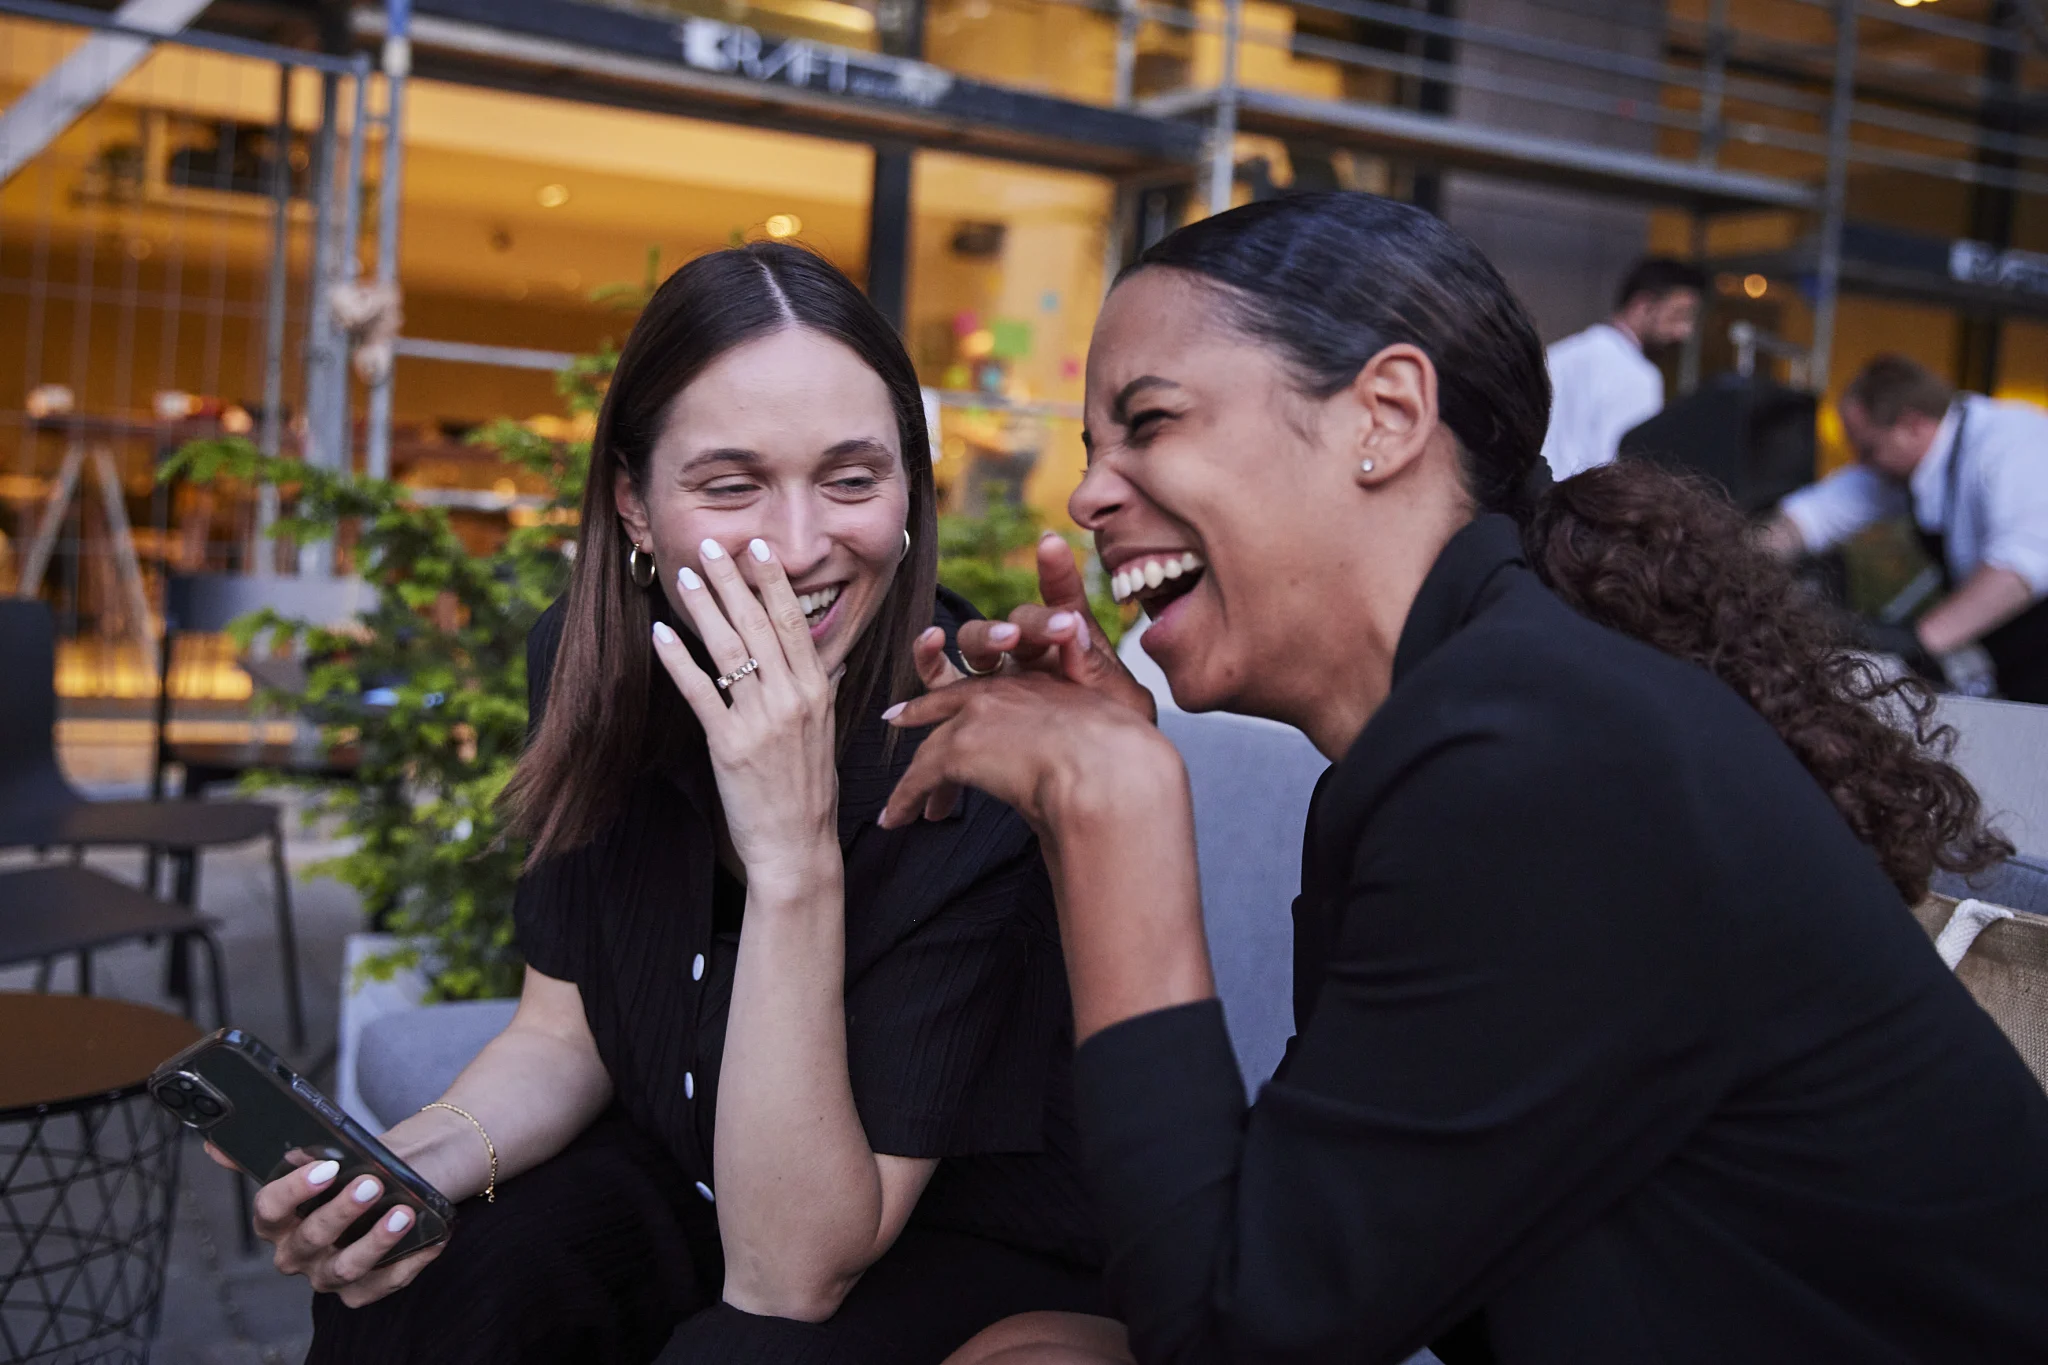 HR Dinner, two people laughing